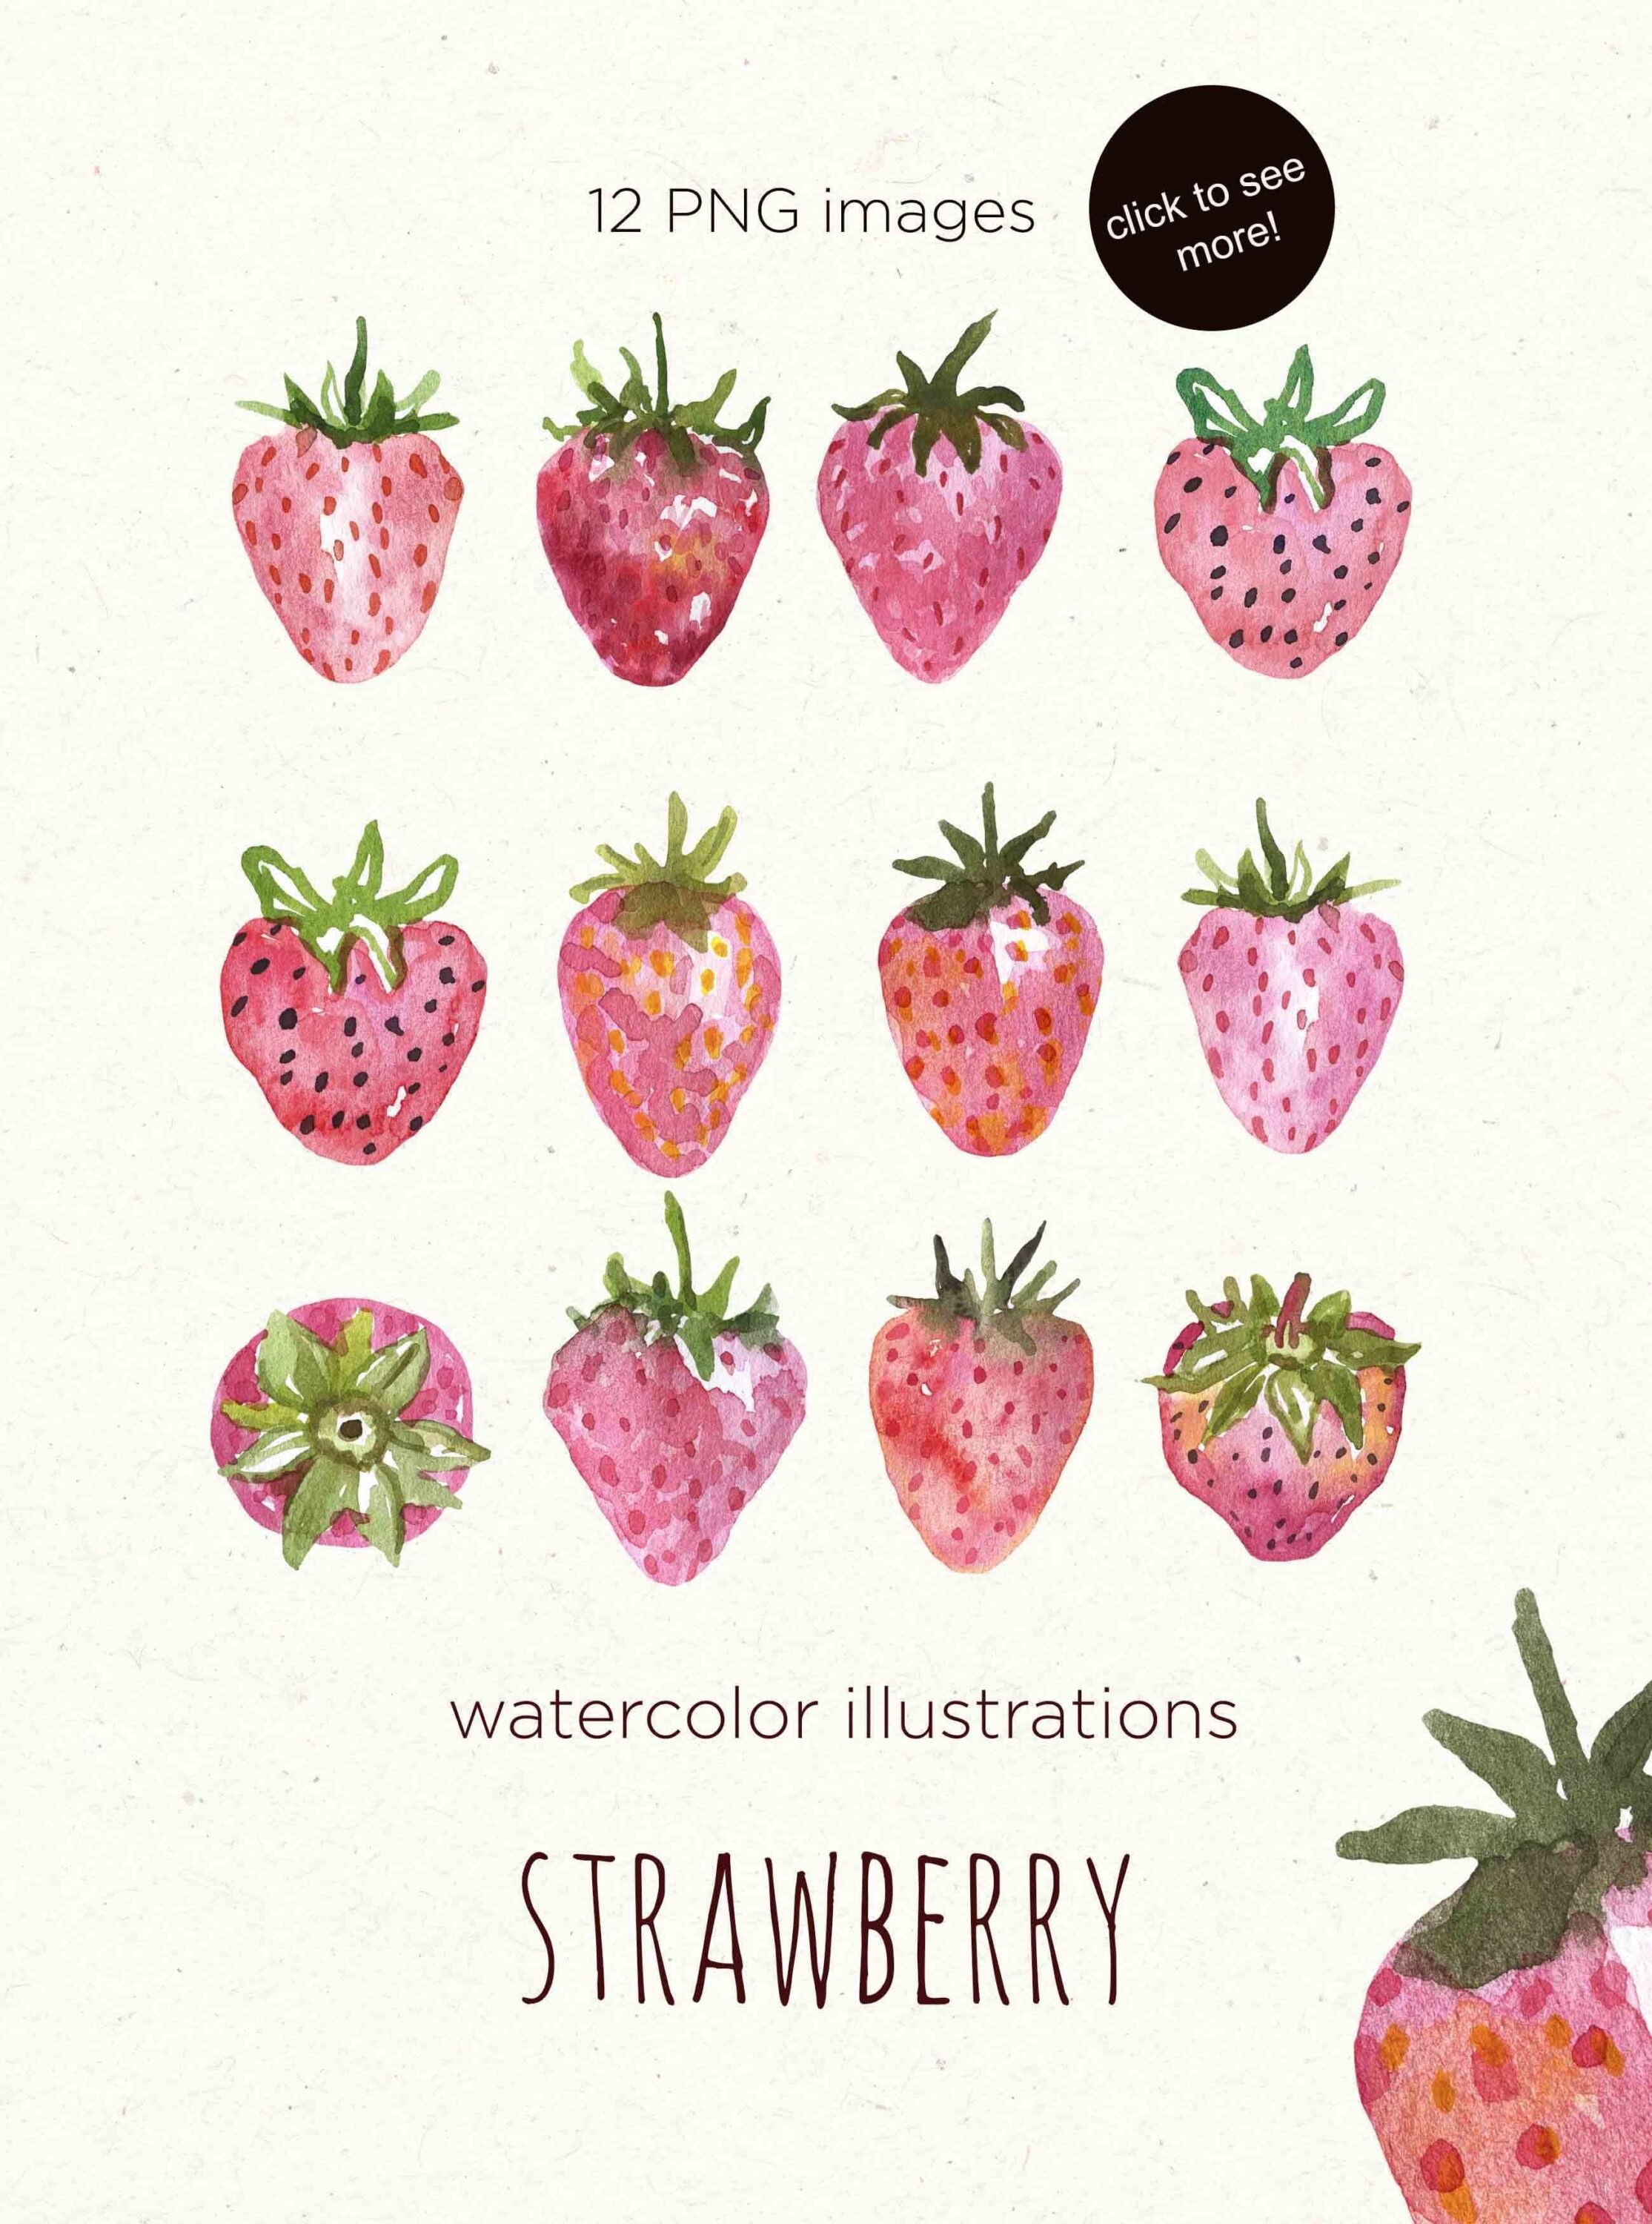 Watercolor drawings of red and pink strawberries with small black seeds.